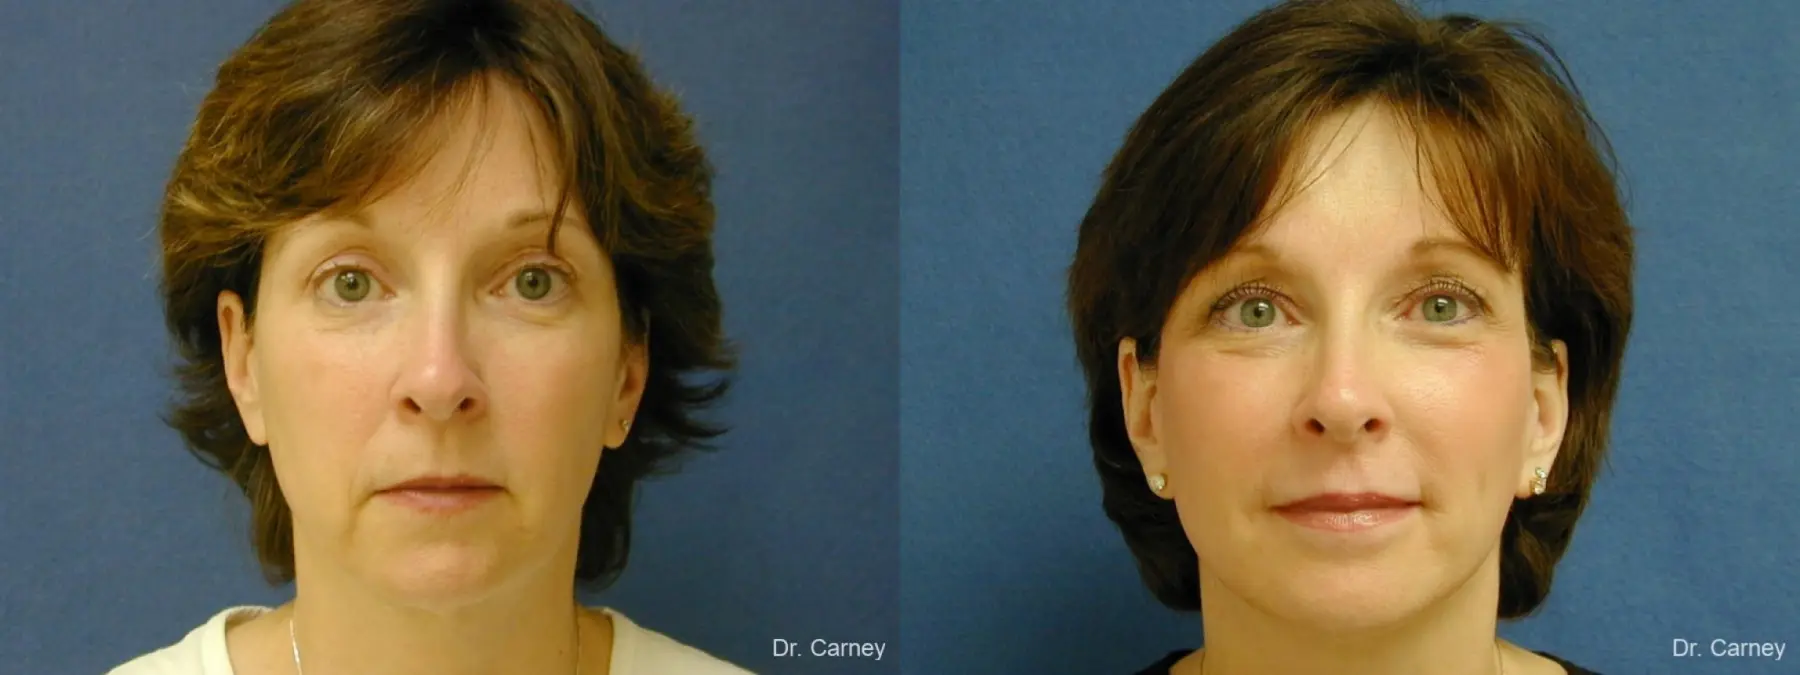 Virginia Beach Brow Lift 1217 - Before and After